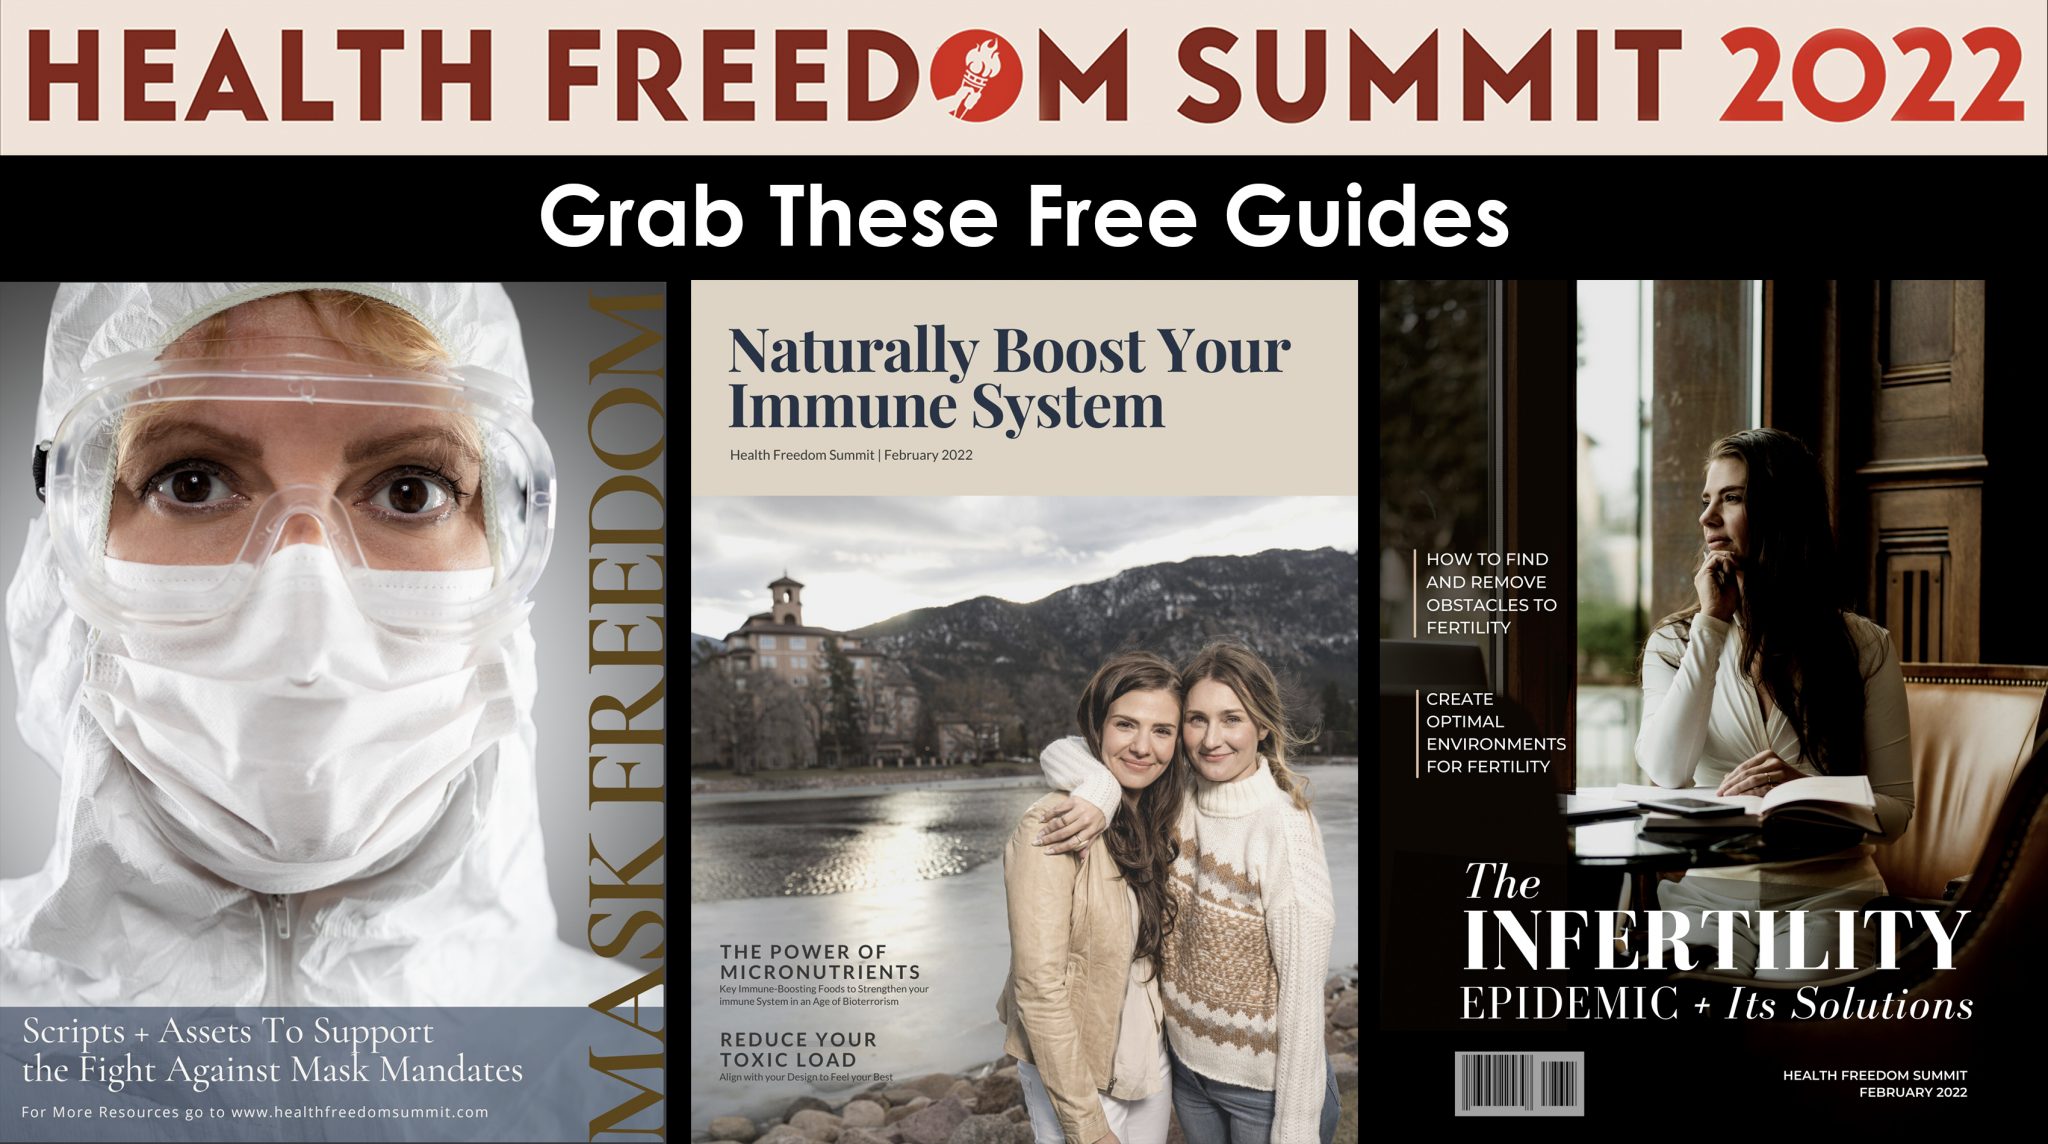  Grab These Free Helpful Guides from Health Freedom Summit 2022